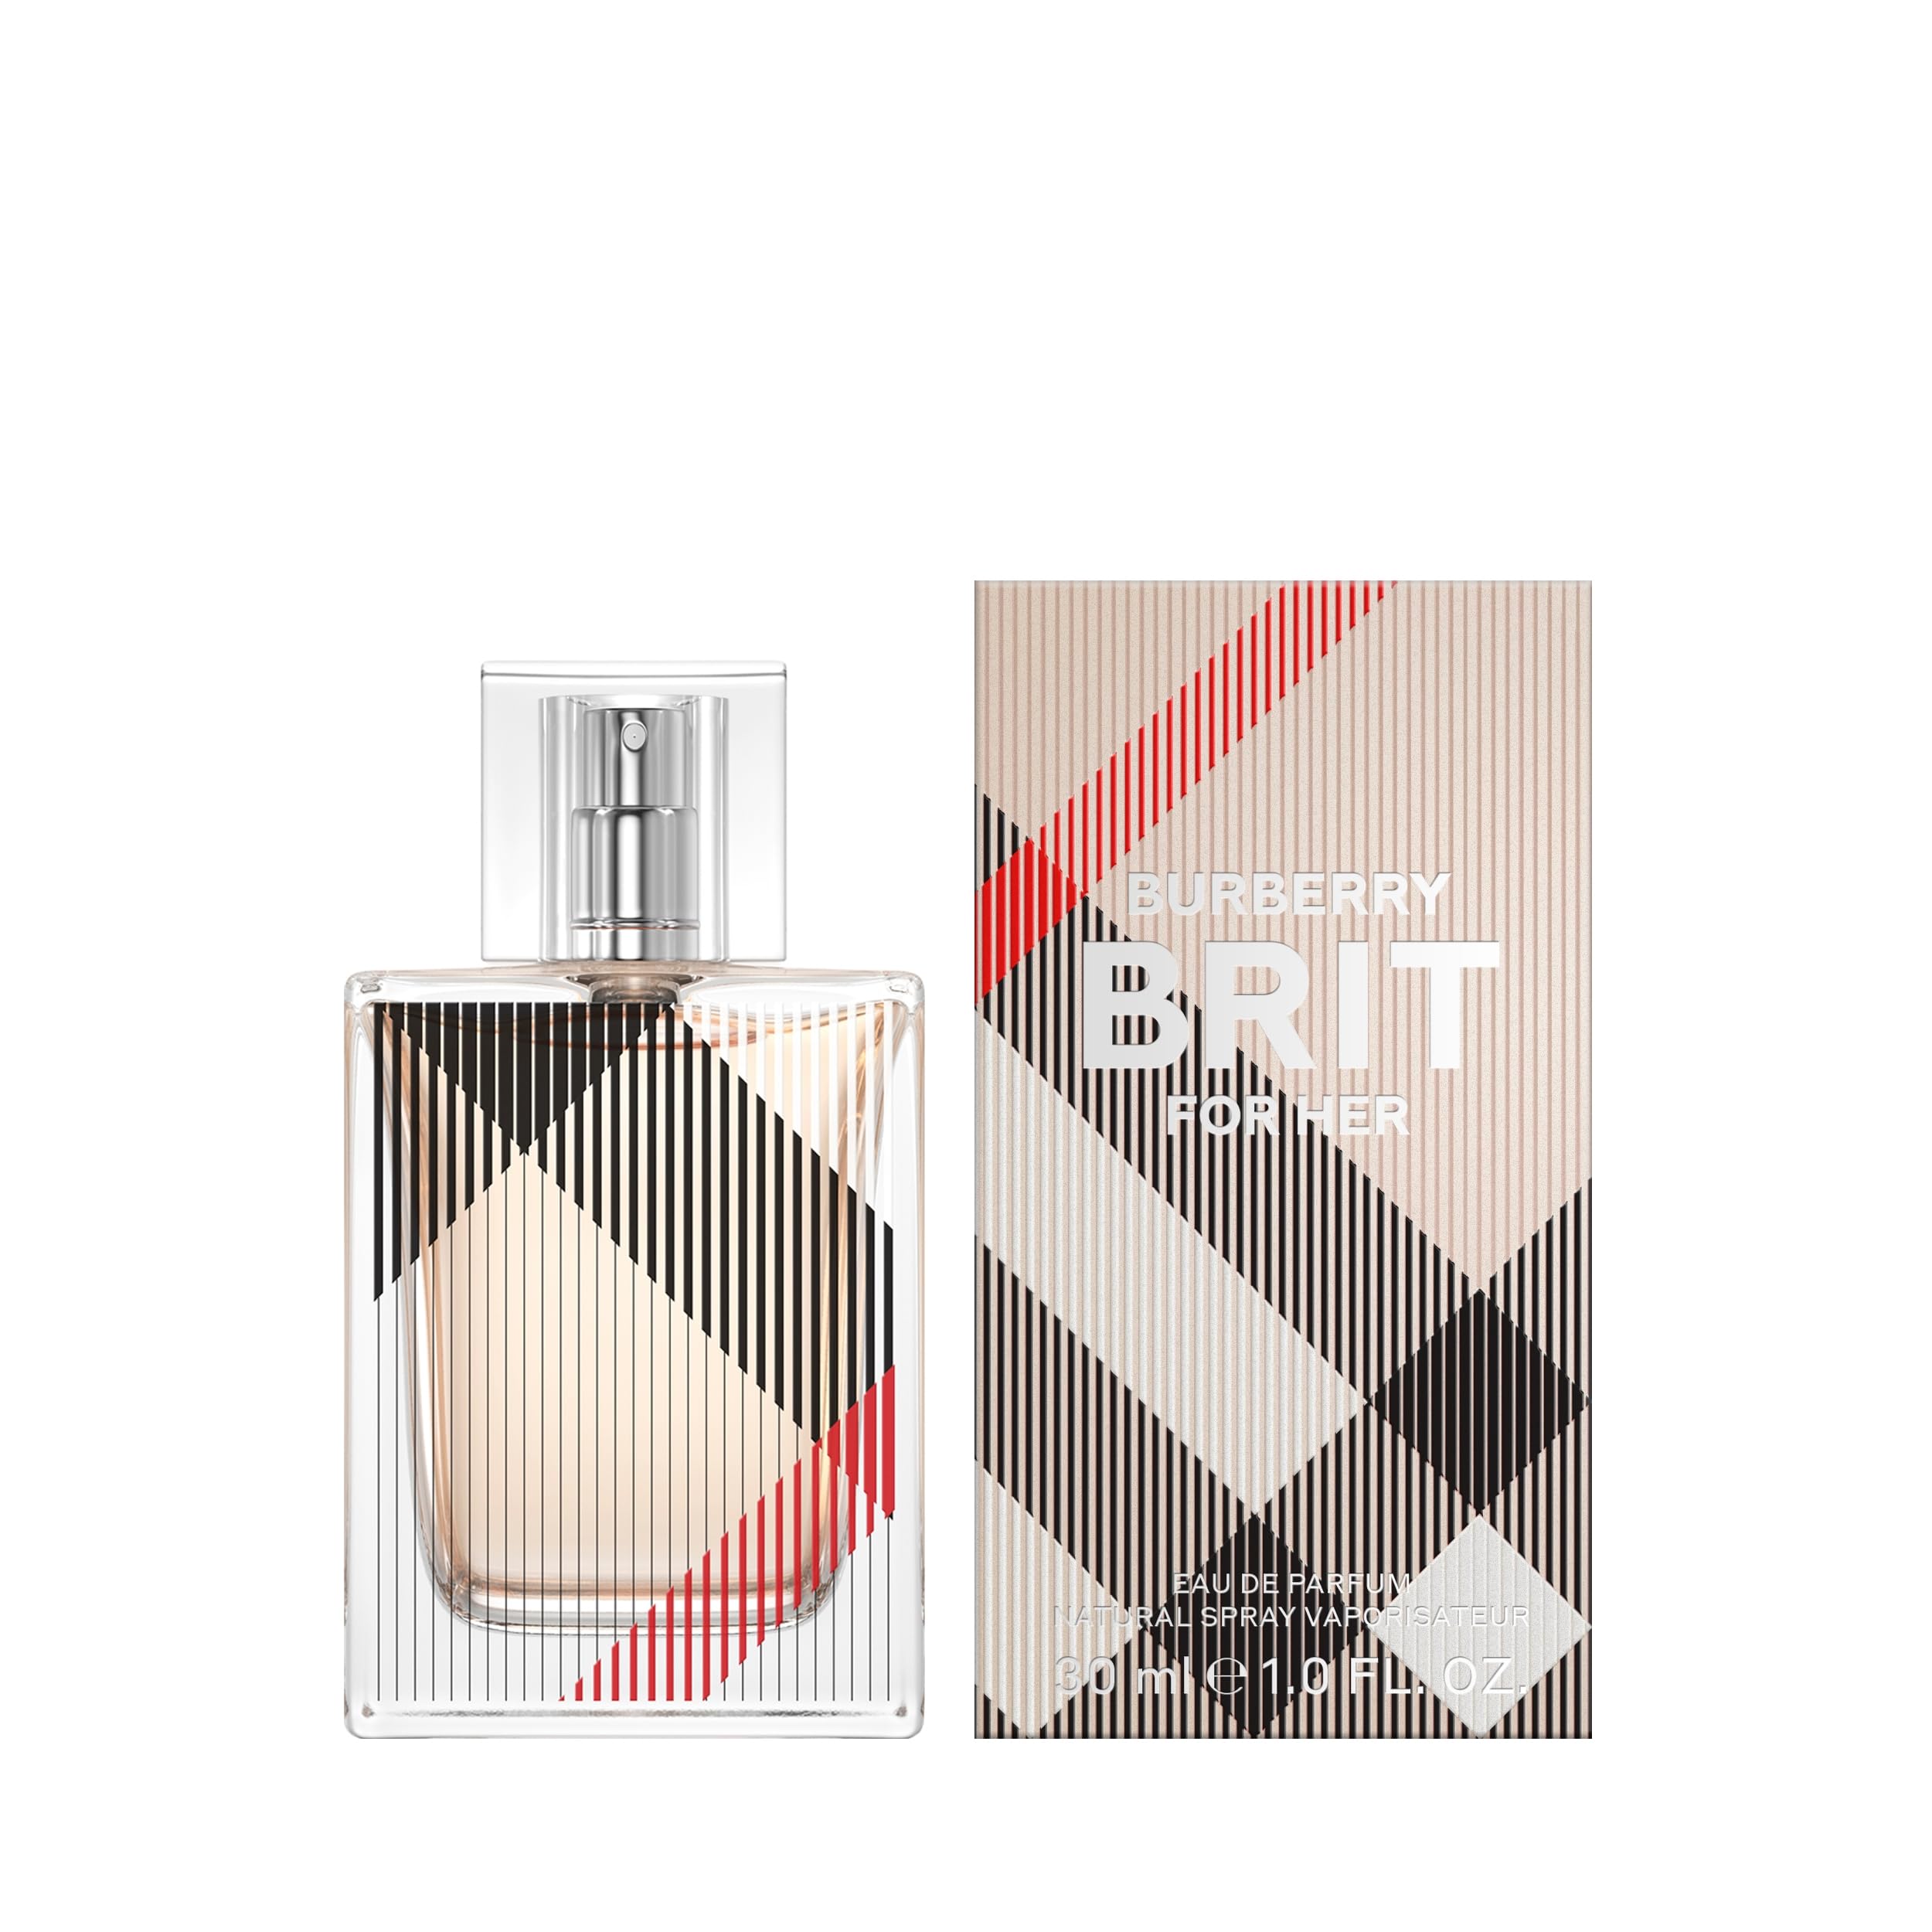 Burberry Brit Eau de Parfum for Women - Notes of crisp, icy pear, sugared almond and intense vanilla